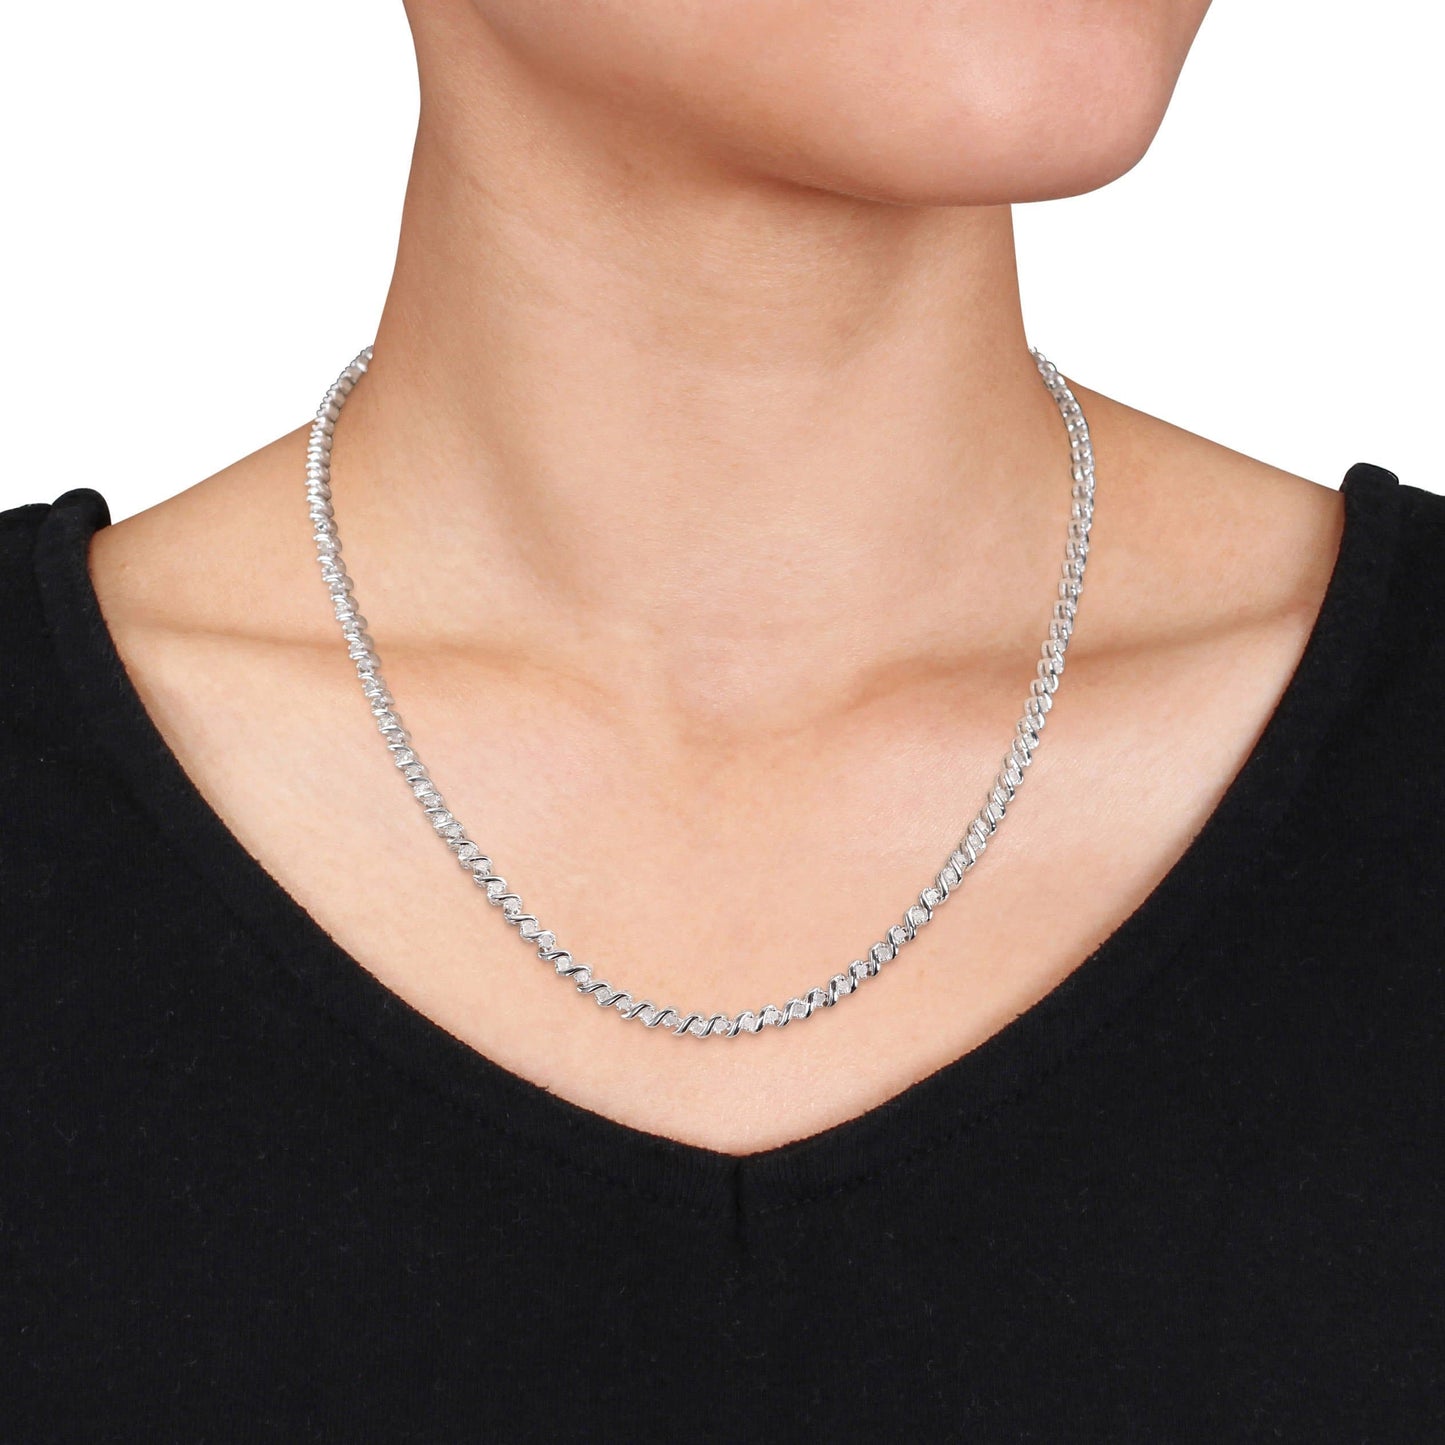 Julie Leah Diamond Tennis Necklace in Sterling Silver